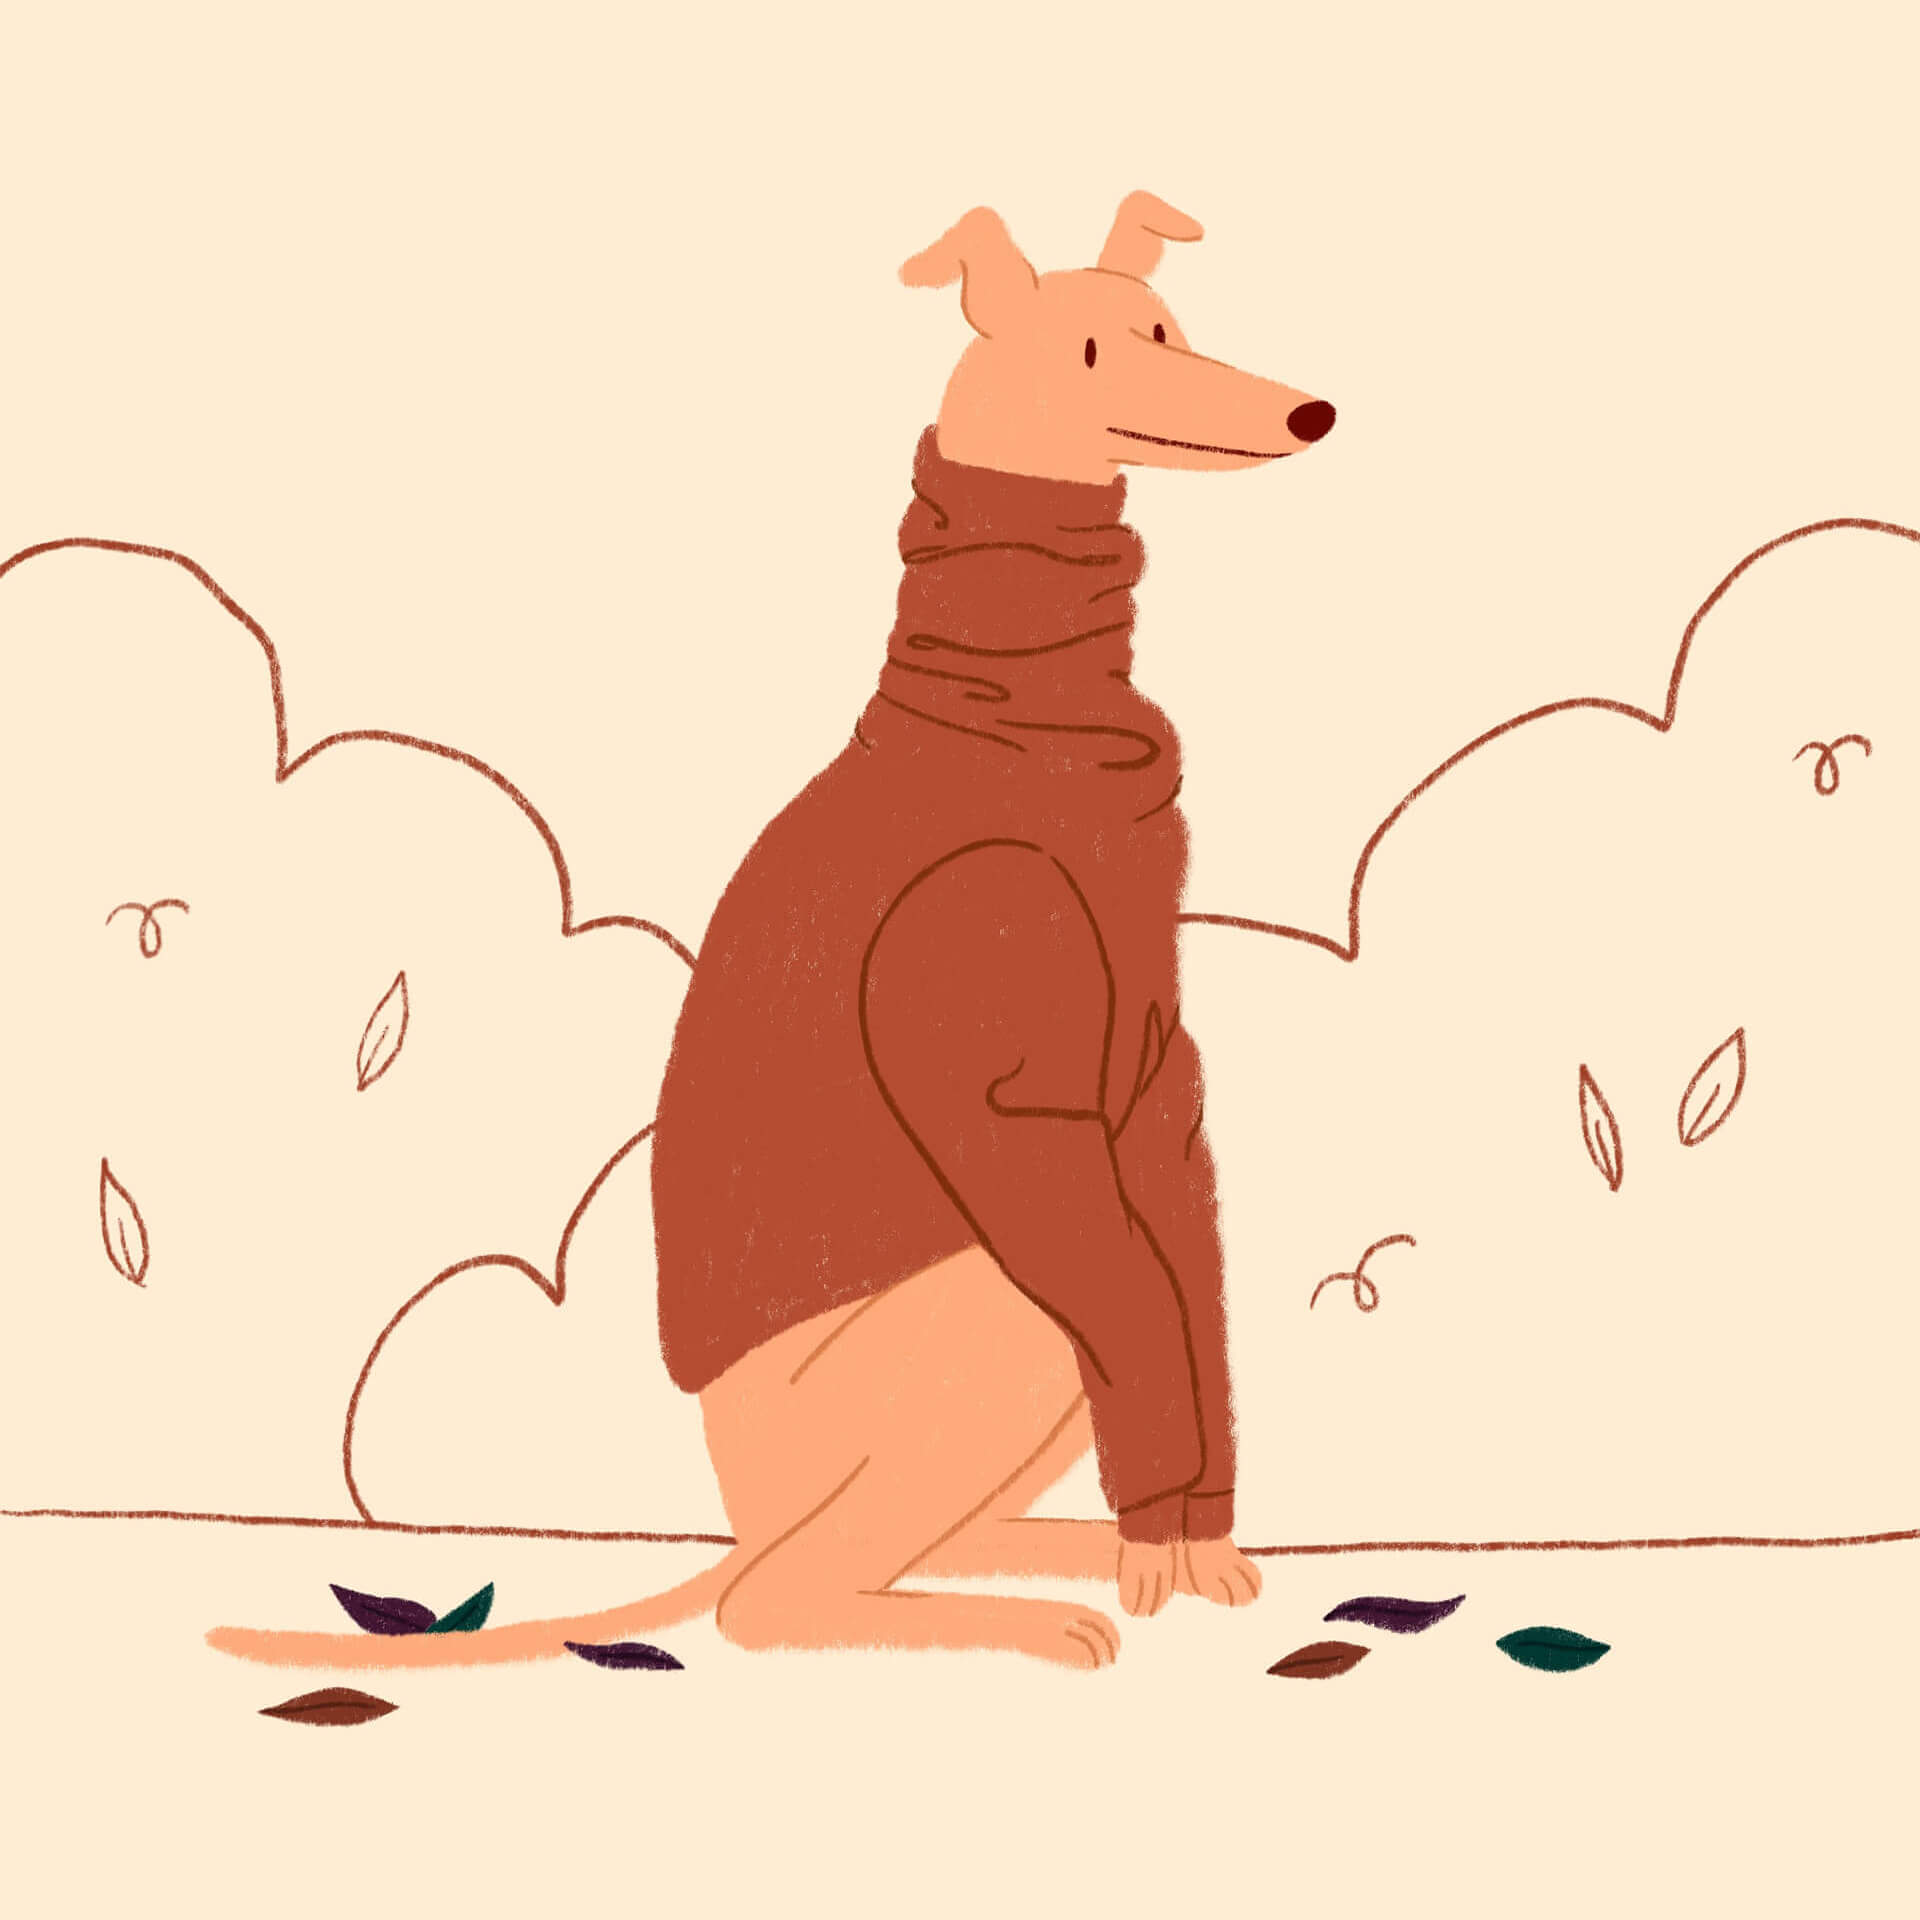 An illustration of a small orange sighthound in a sweater